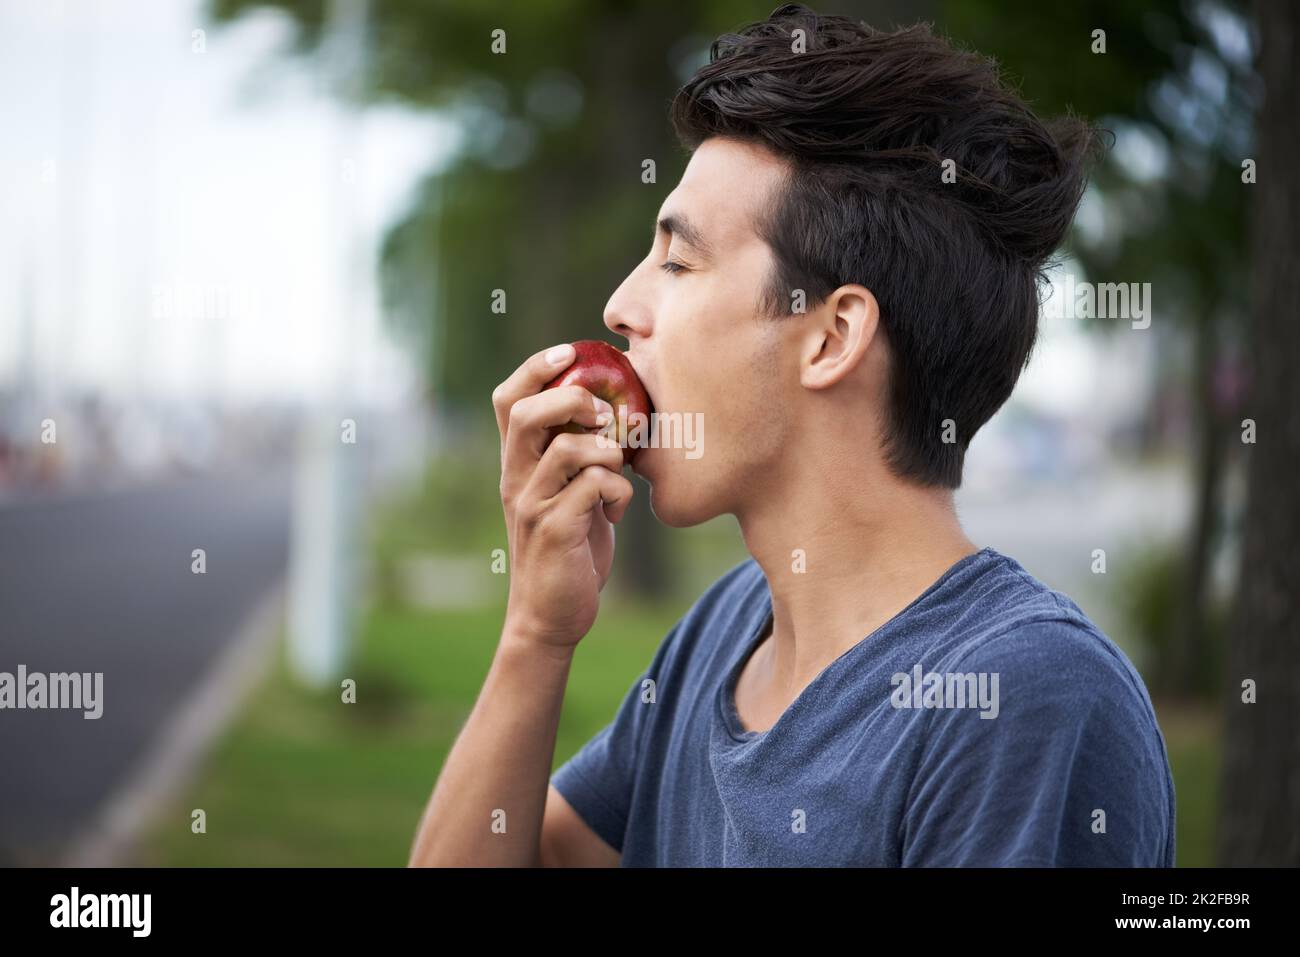 Taking a bite. A young man taking a bite of an apple while waiting for the bus. Stock Photo